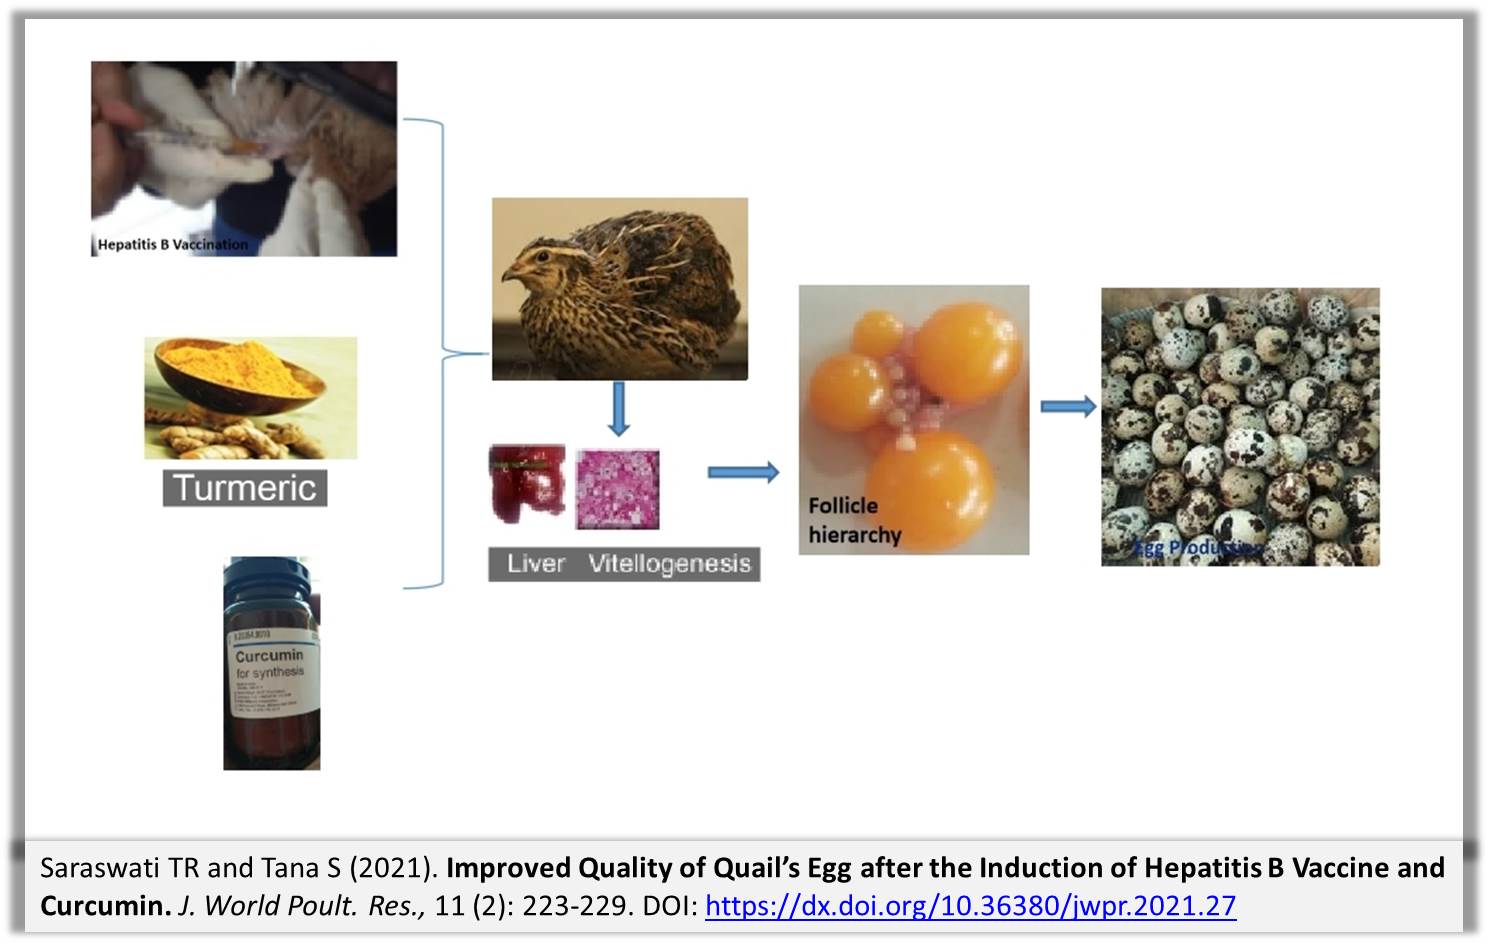 1300-8-Quality_of_Quails_Egg_after_the_Induction_of_Hepatitis_B_Vaccine_and_Curcumin